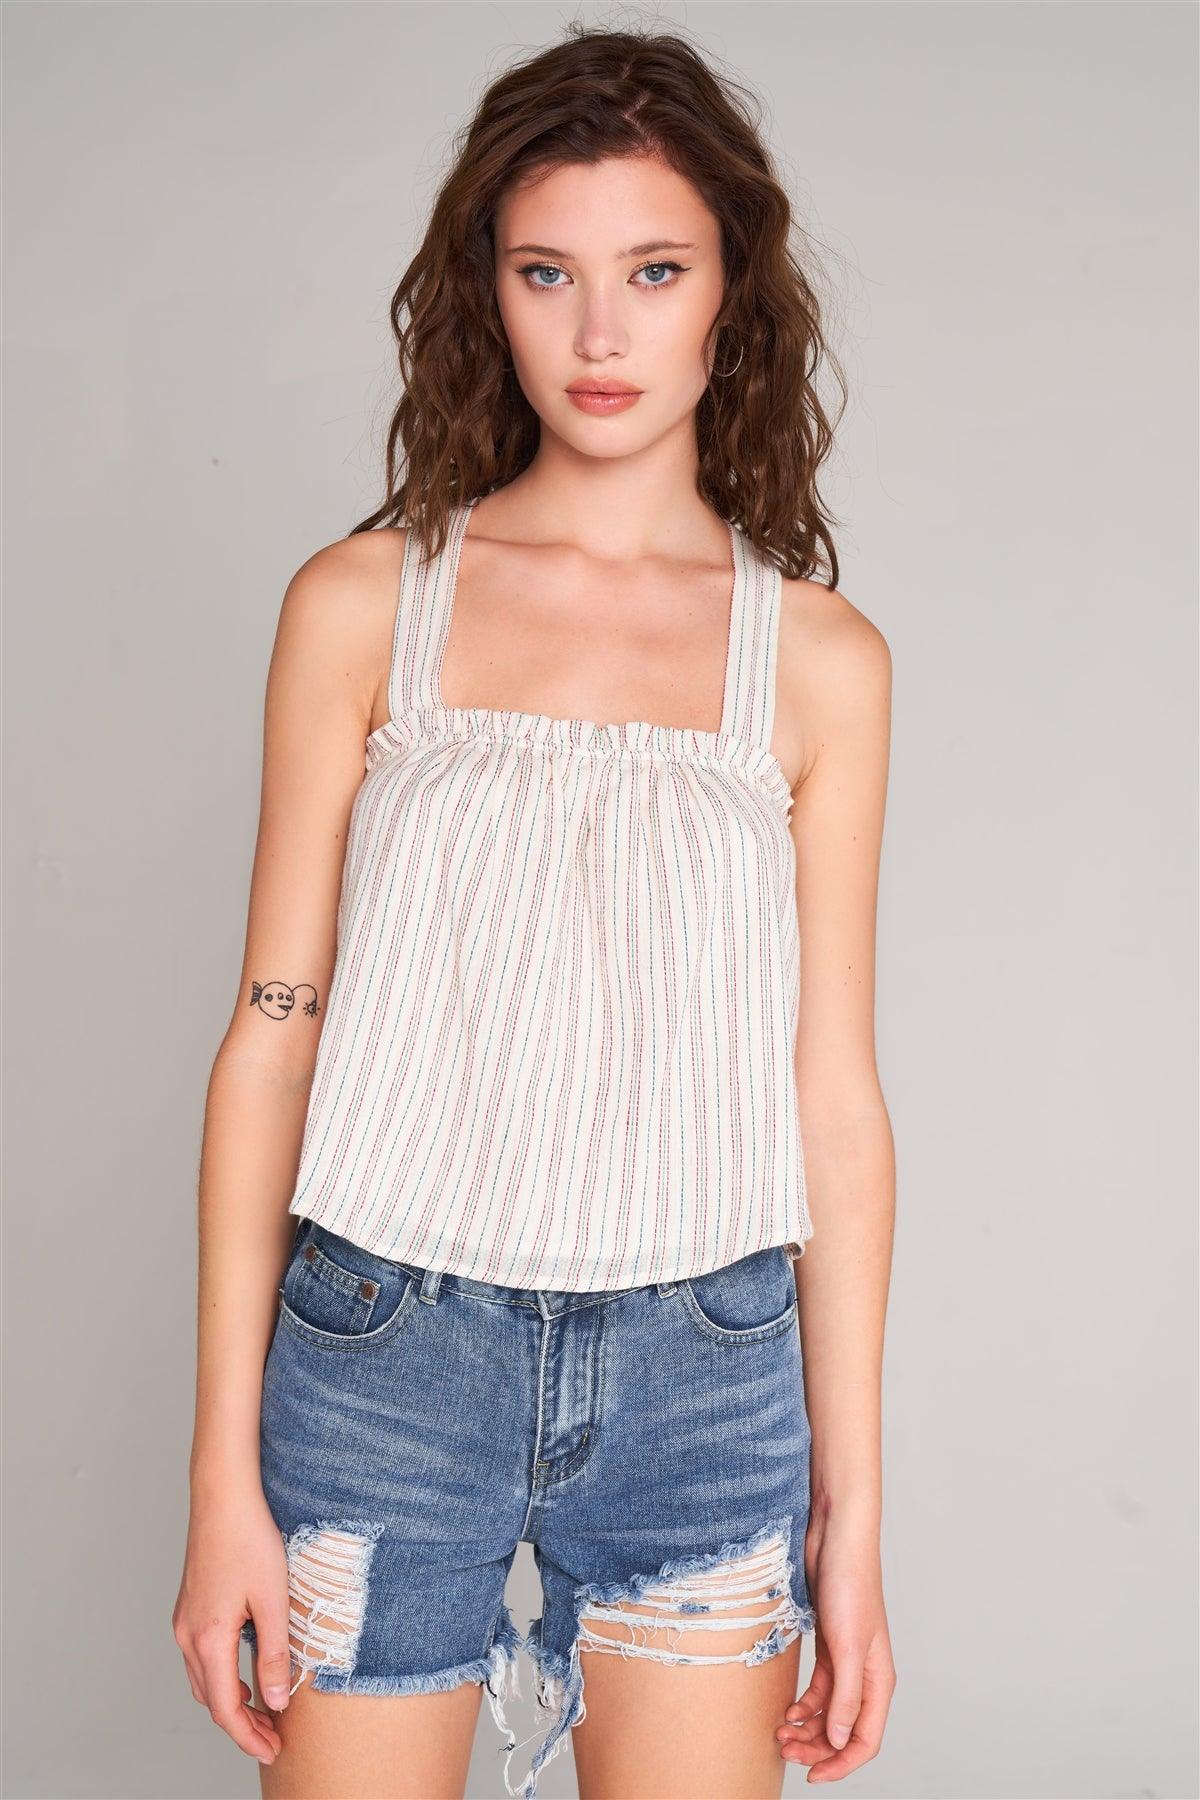 Cream Stripped Sleeveless Square Neck Criss-Cross Back Detail Frill Apron Top /3-2-1